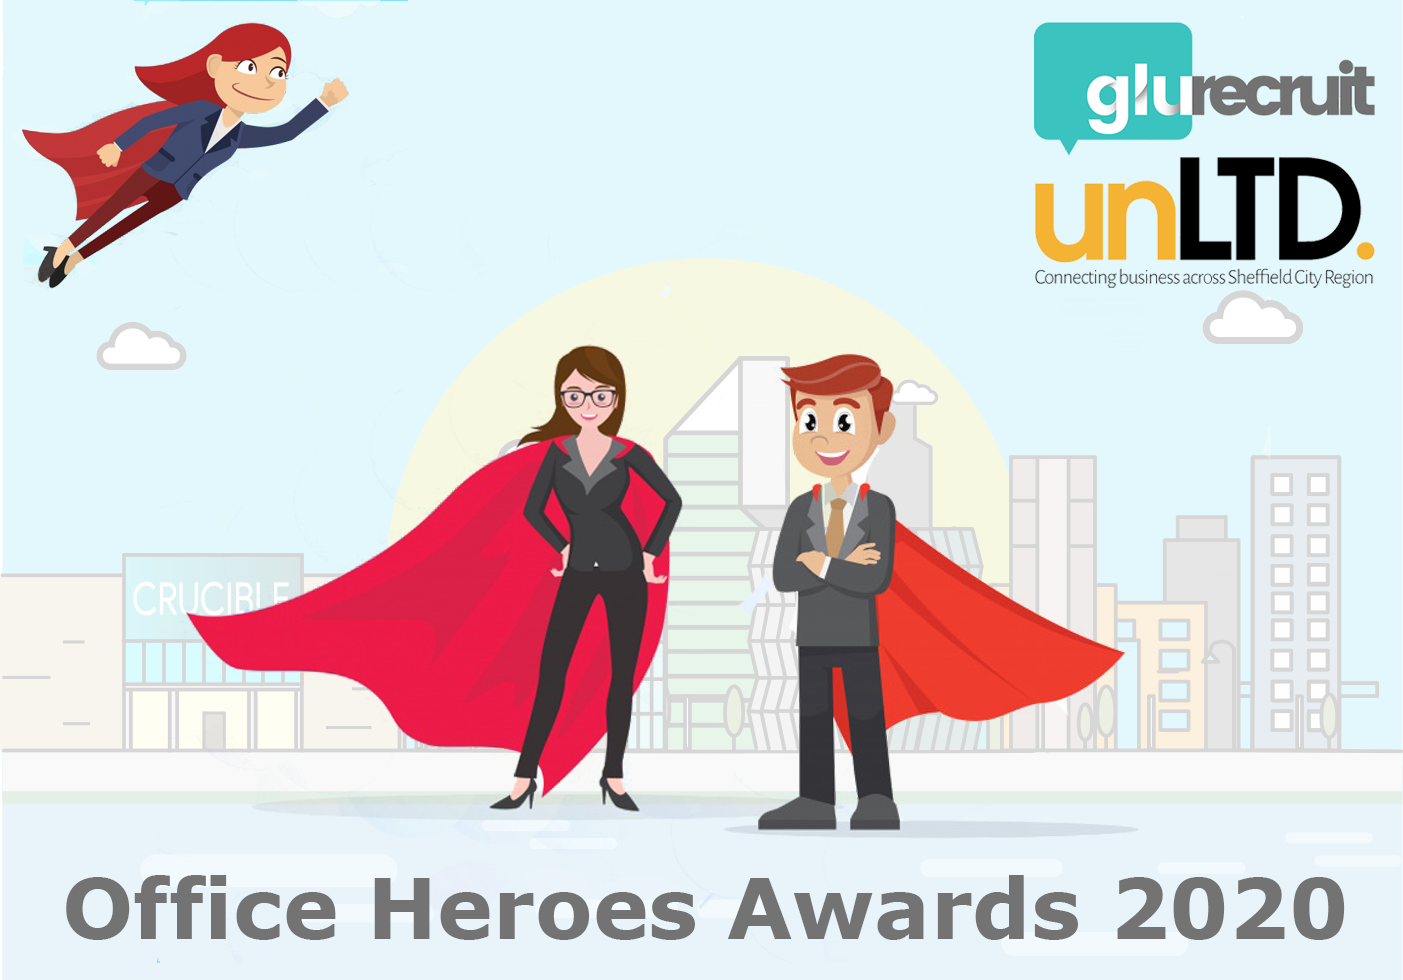 The Office Heroes Awards are back, and we need your nominations!